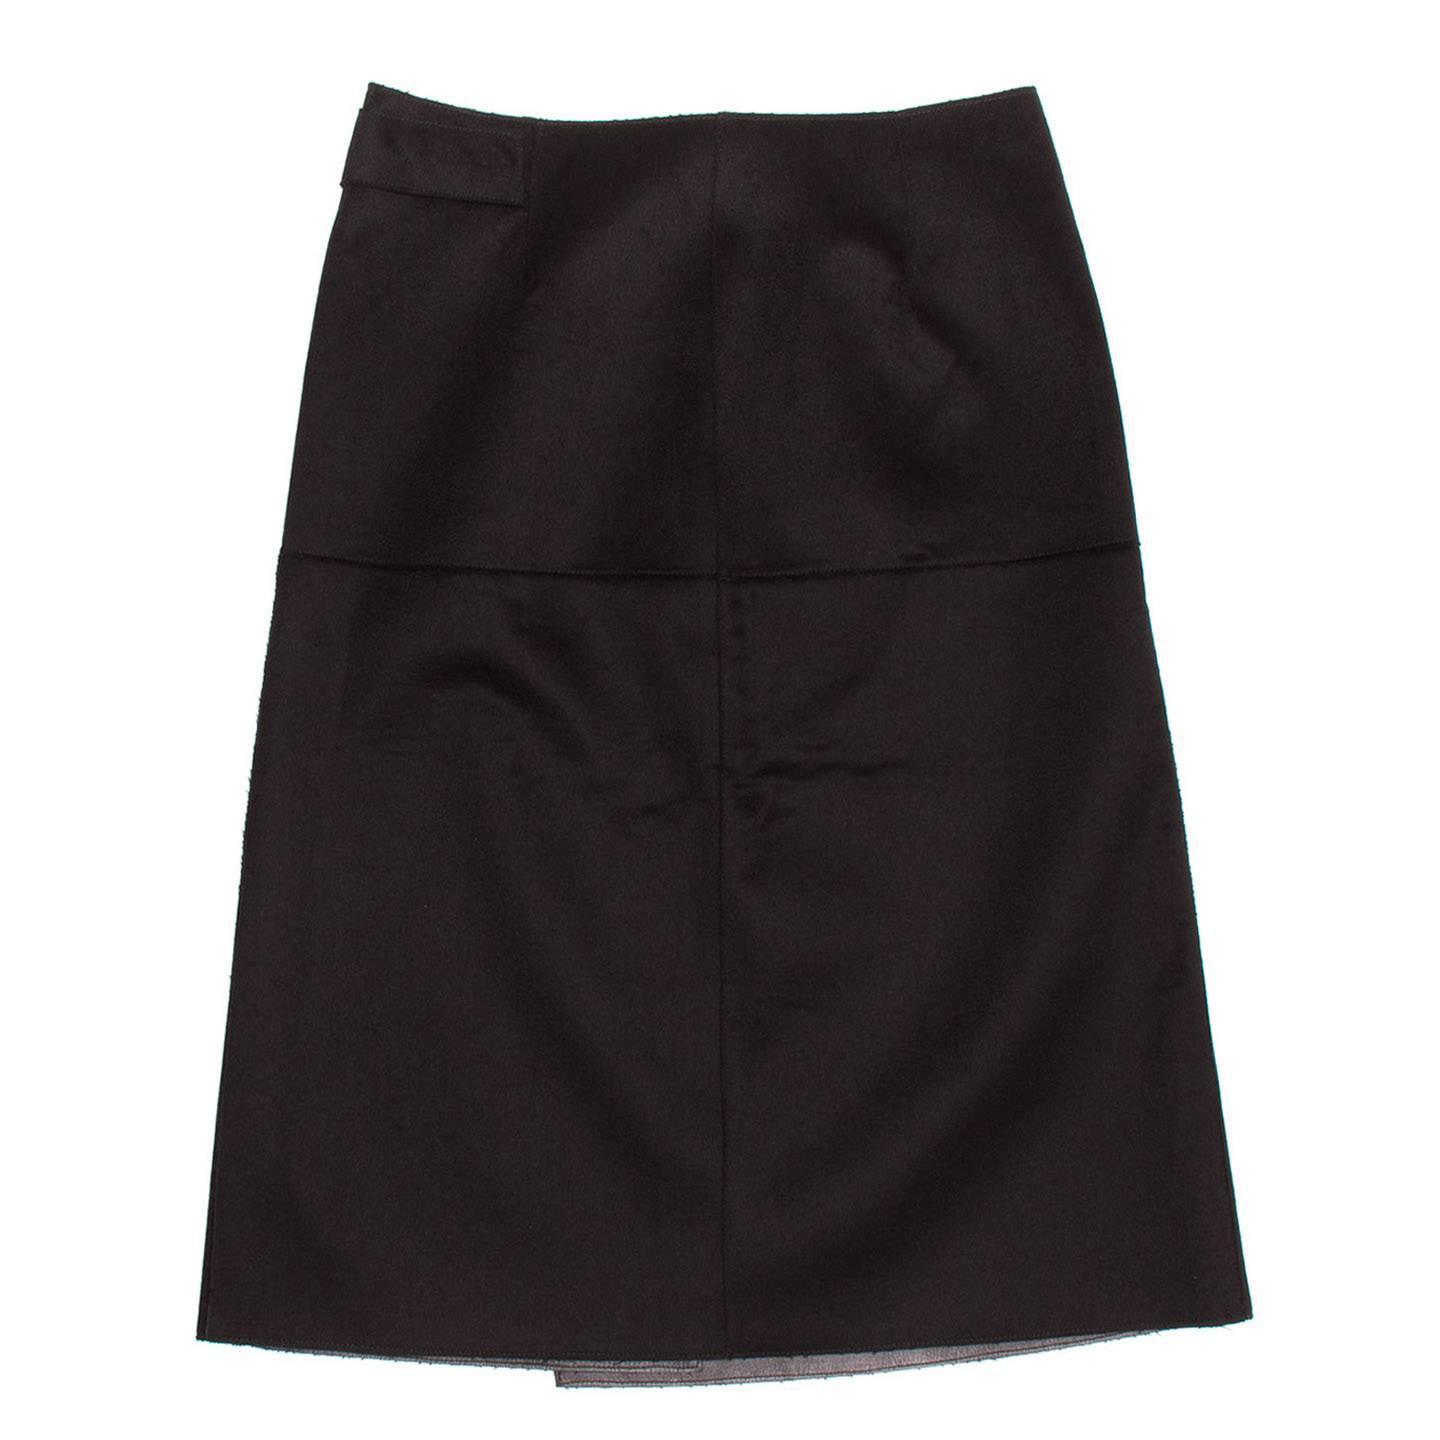 Prada Black Reversible Leather and Camel Skirt For Sale at 1stdibs